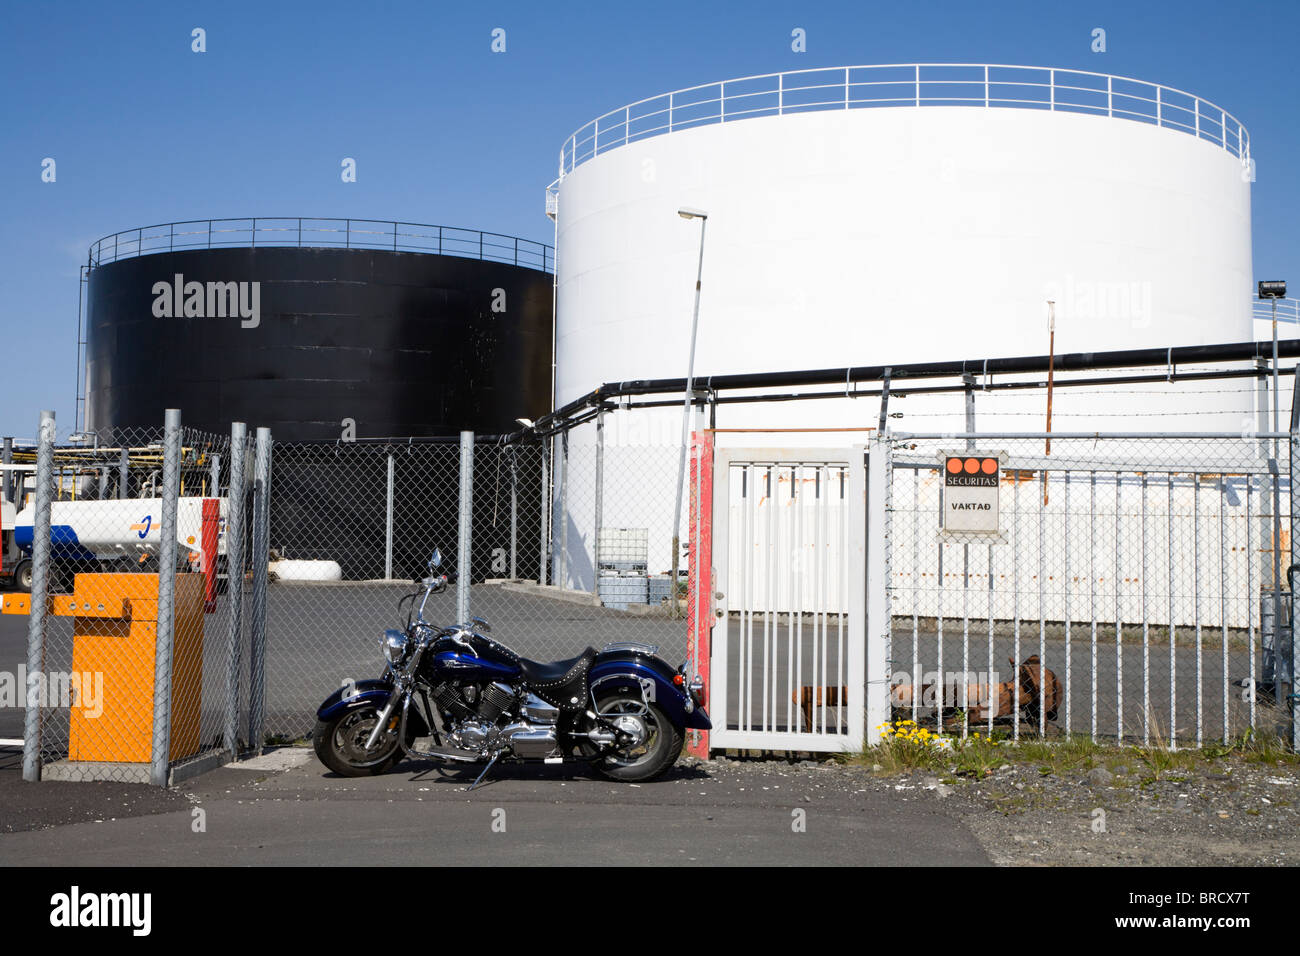 Motorcycle parked by oil/petrol tanks at Grandi, the fishpacking district. Reykjavik Iceland. Stock Photo